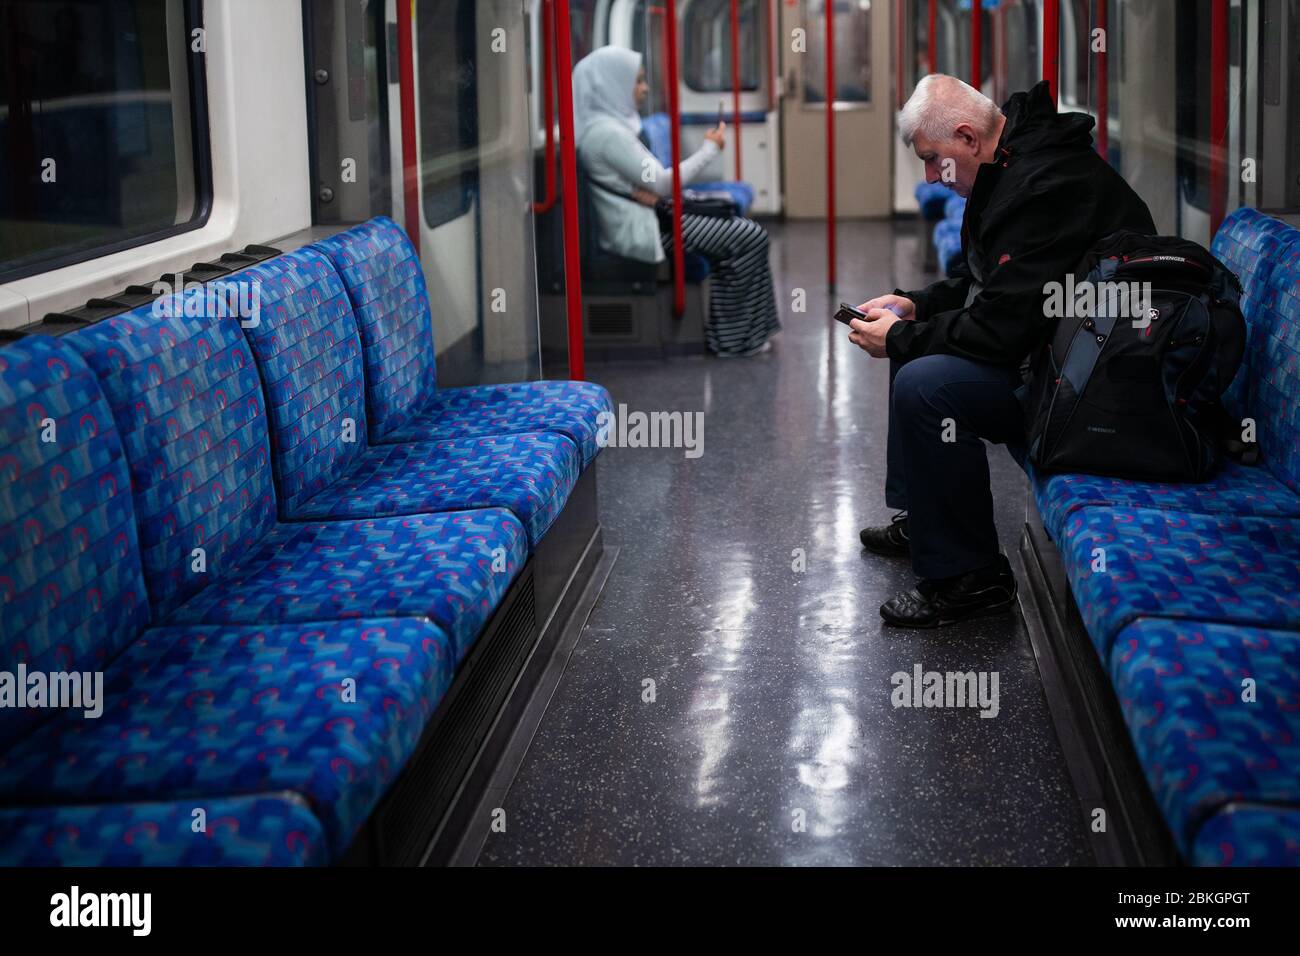 Members of the public stay socially distant on the Central Line as the UK continues in lockdown to help curb the spread of the coronavirus. Stock Photo